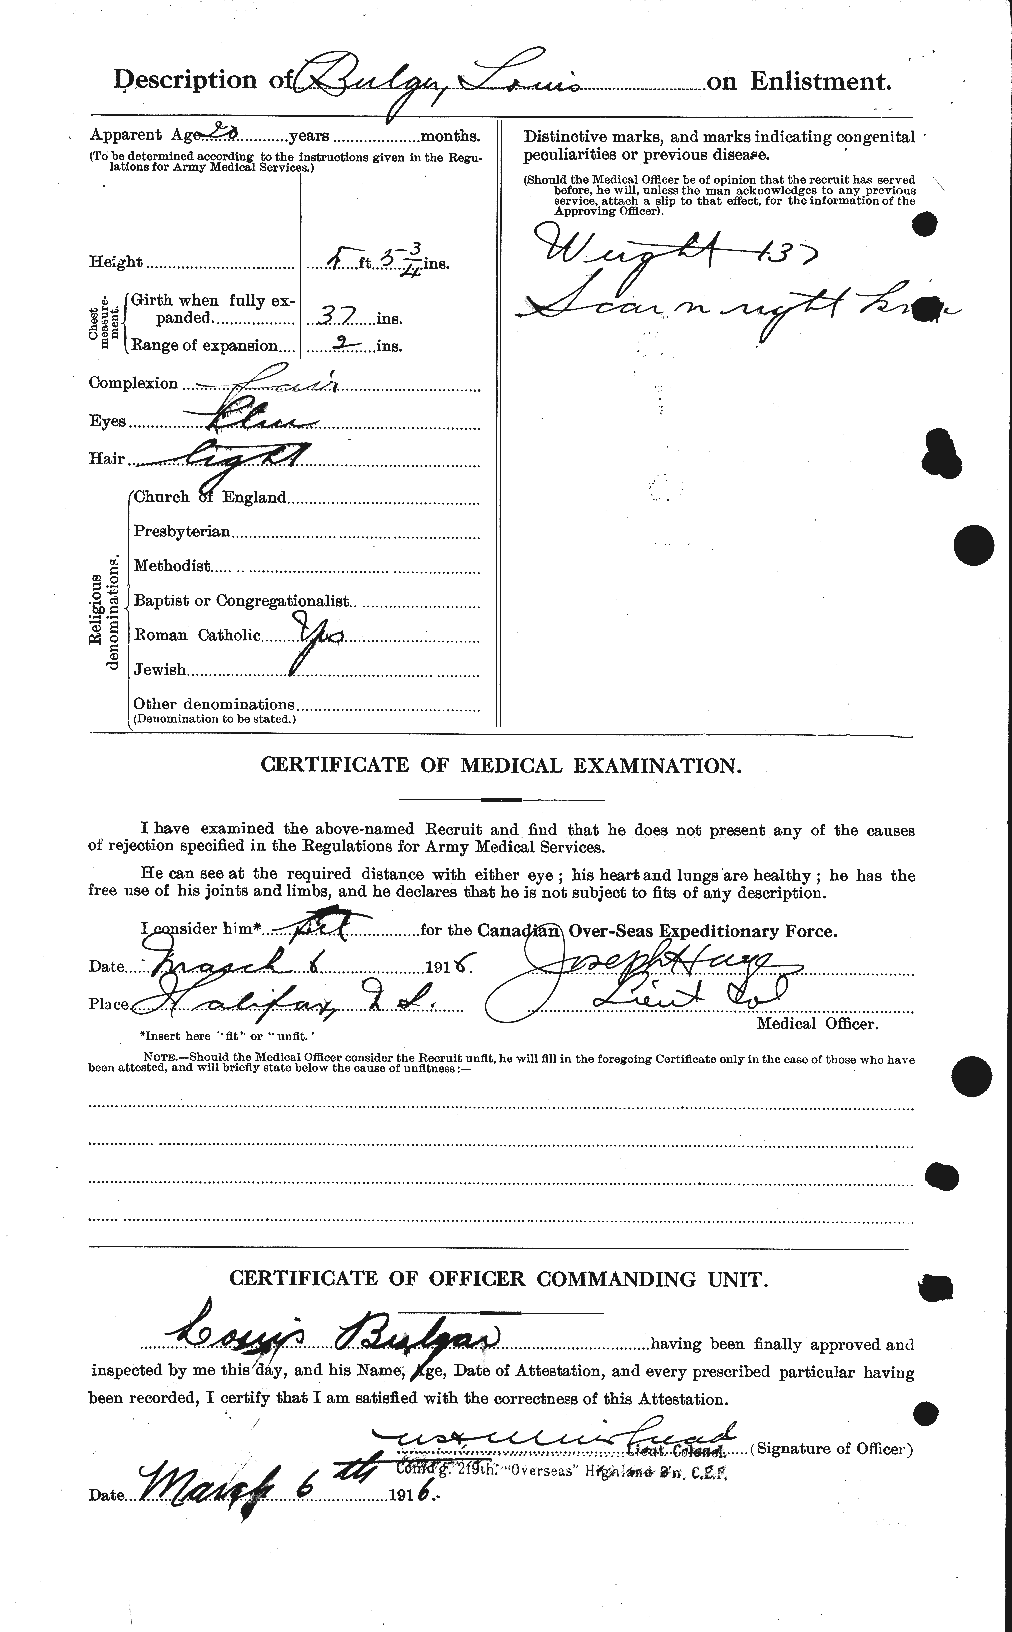 Personnel Records of the First World War - CEF 270635b